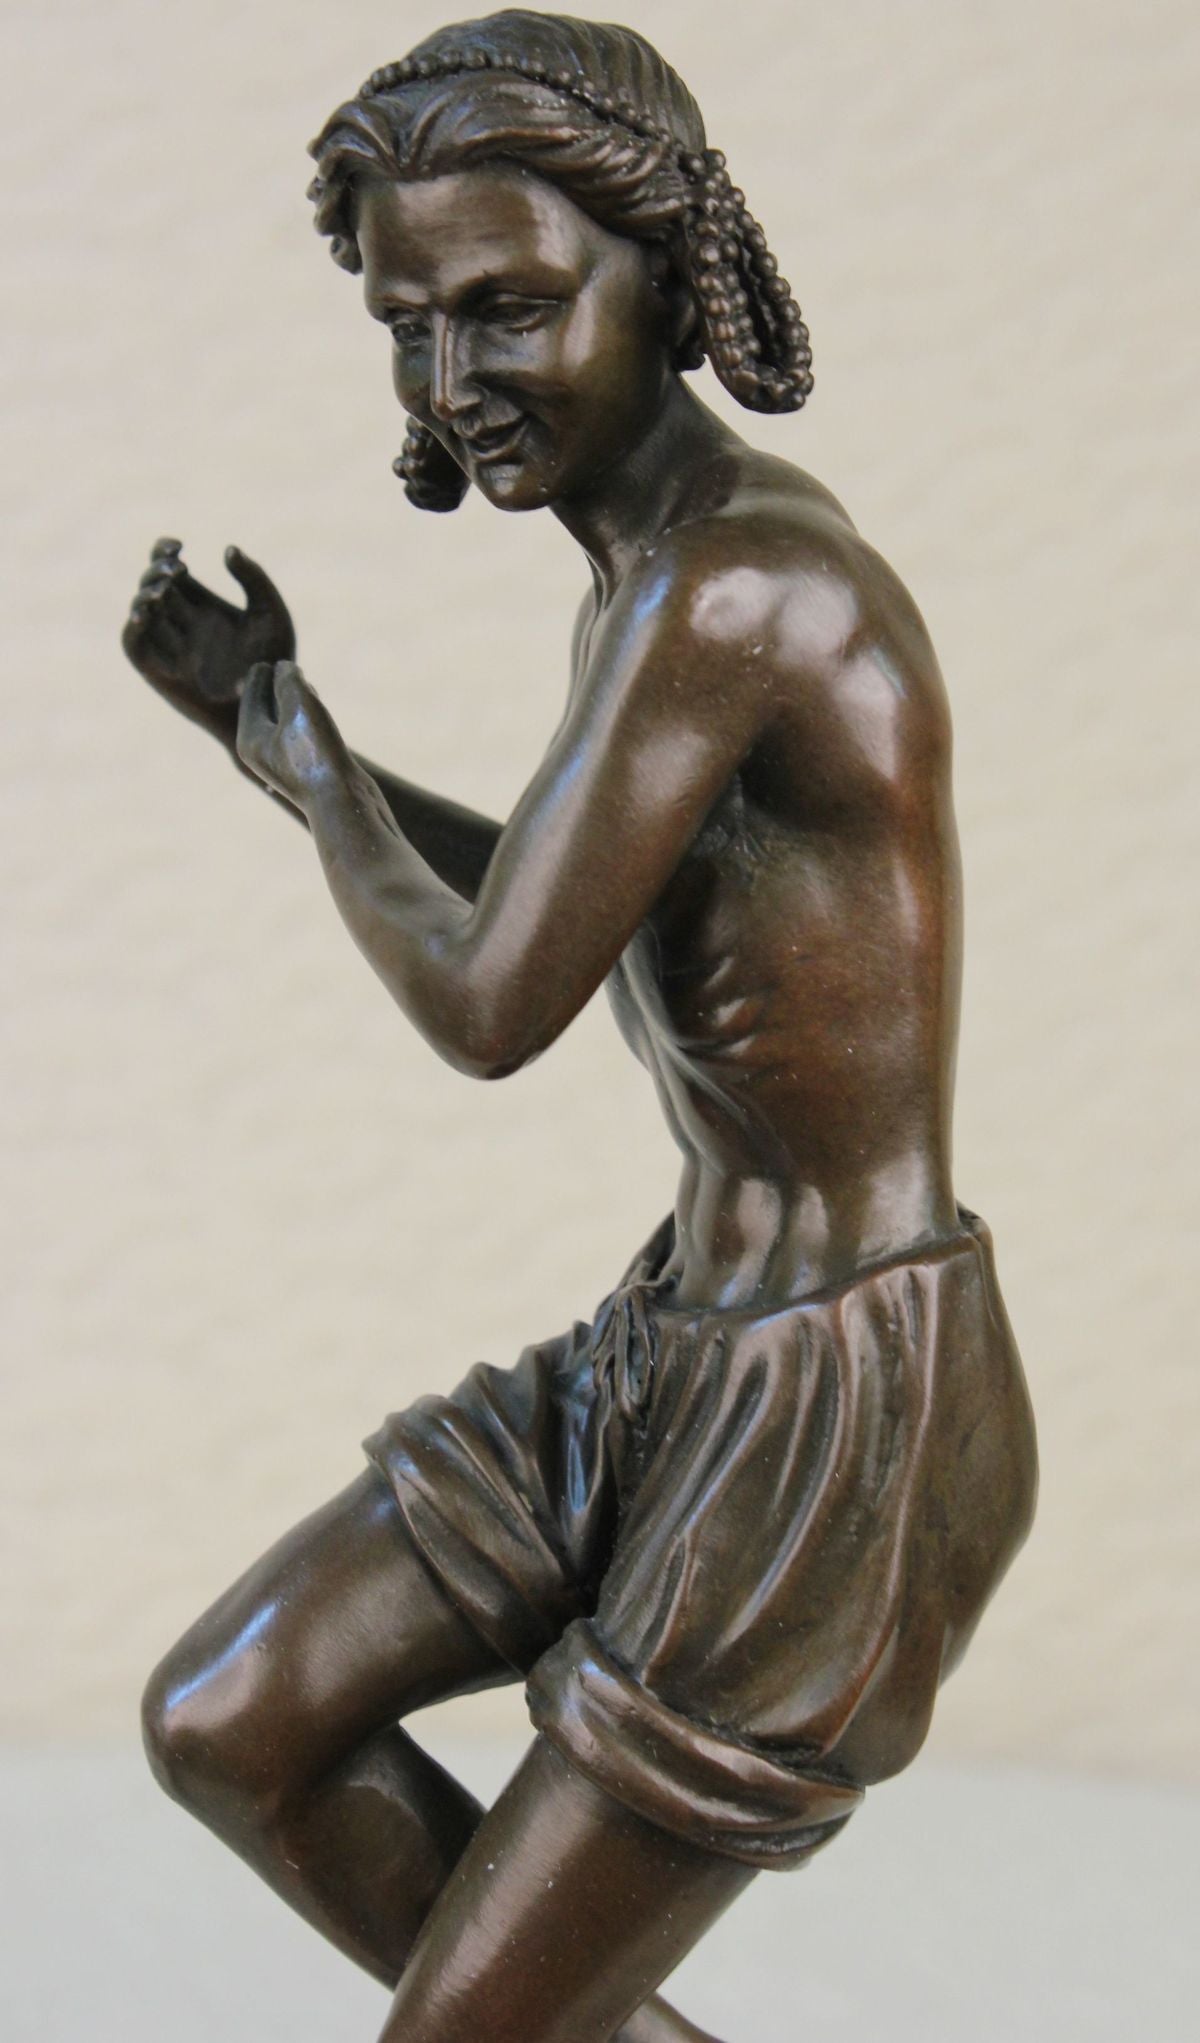 14&quot; Gift Bronze Statue Male Dancer Figures Dancing Signed Marble Base Figurine